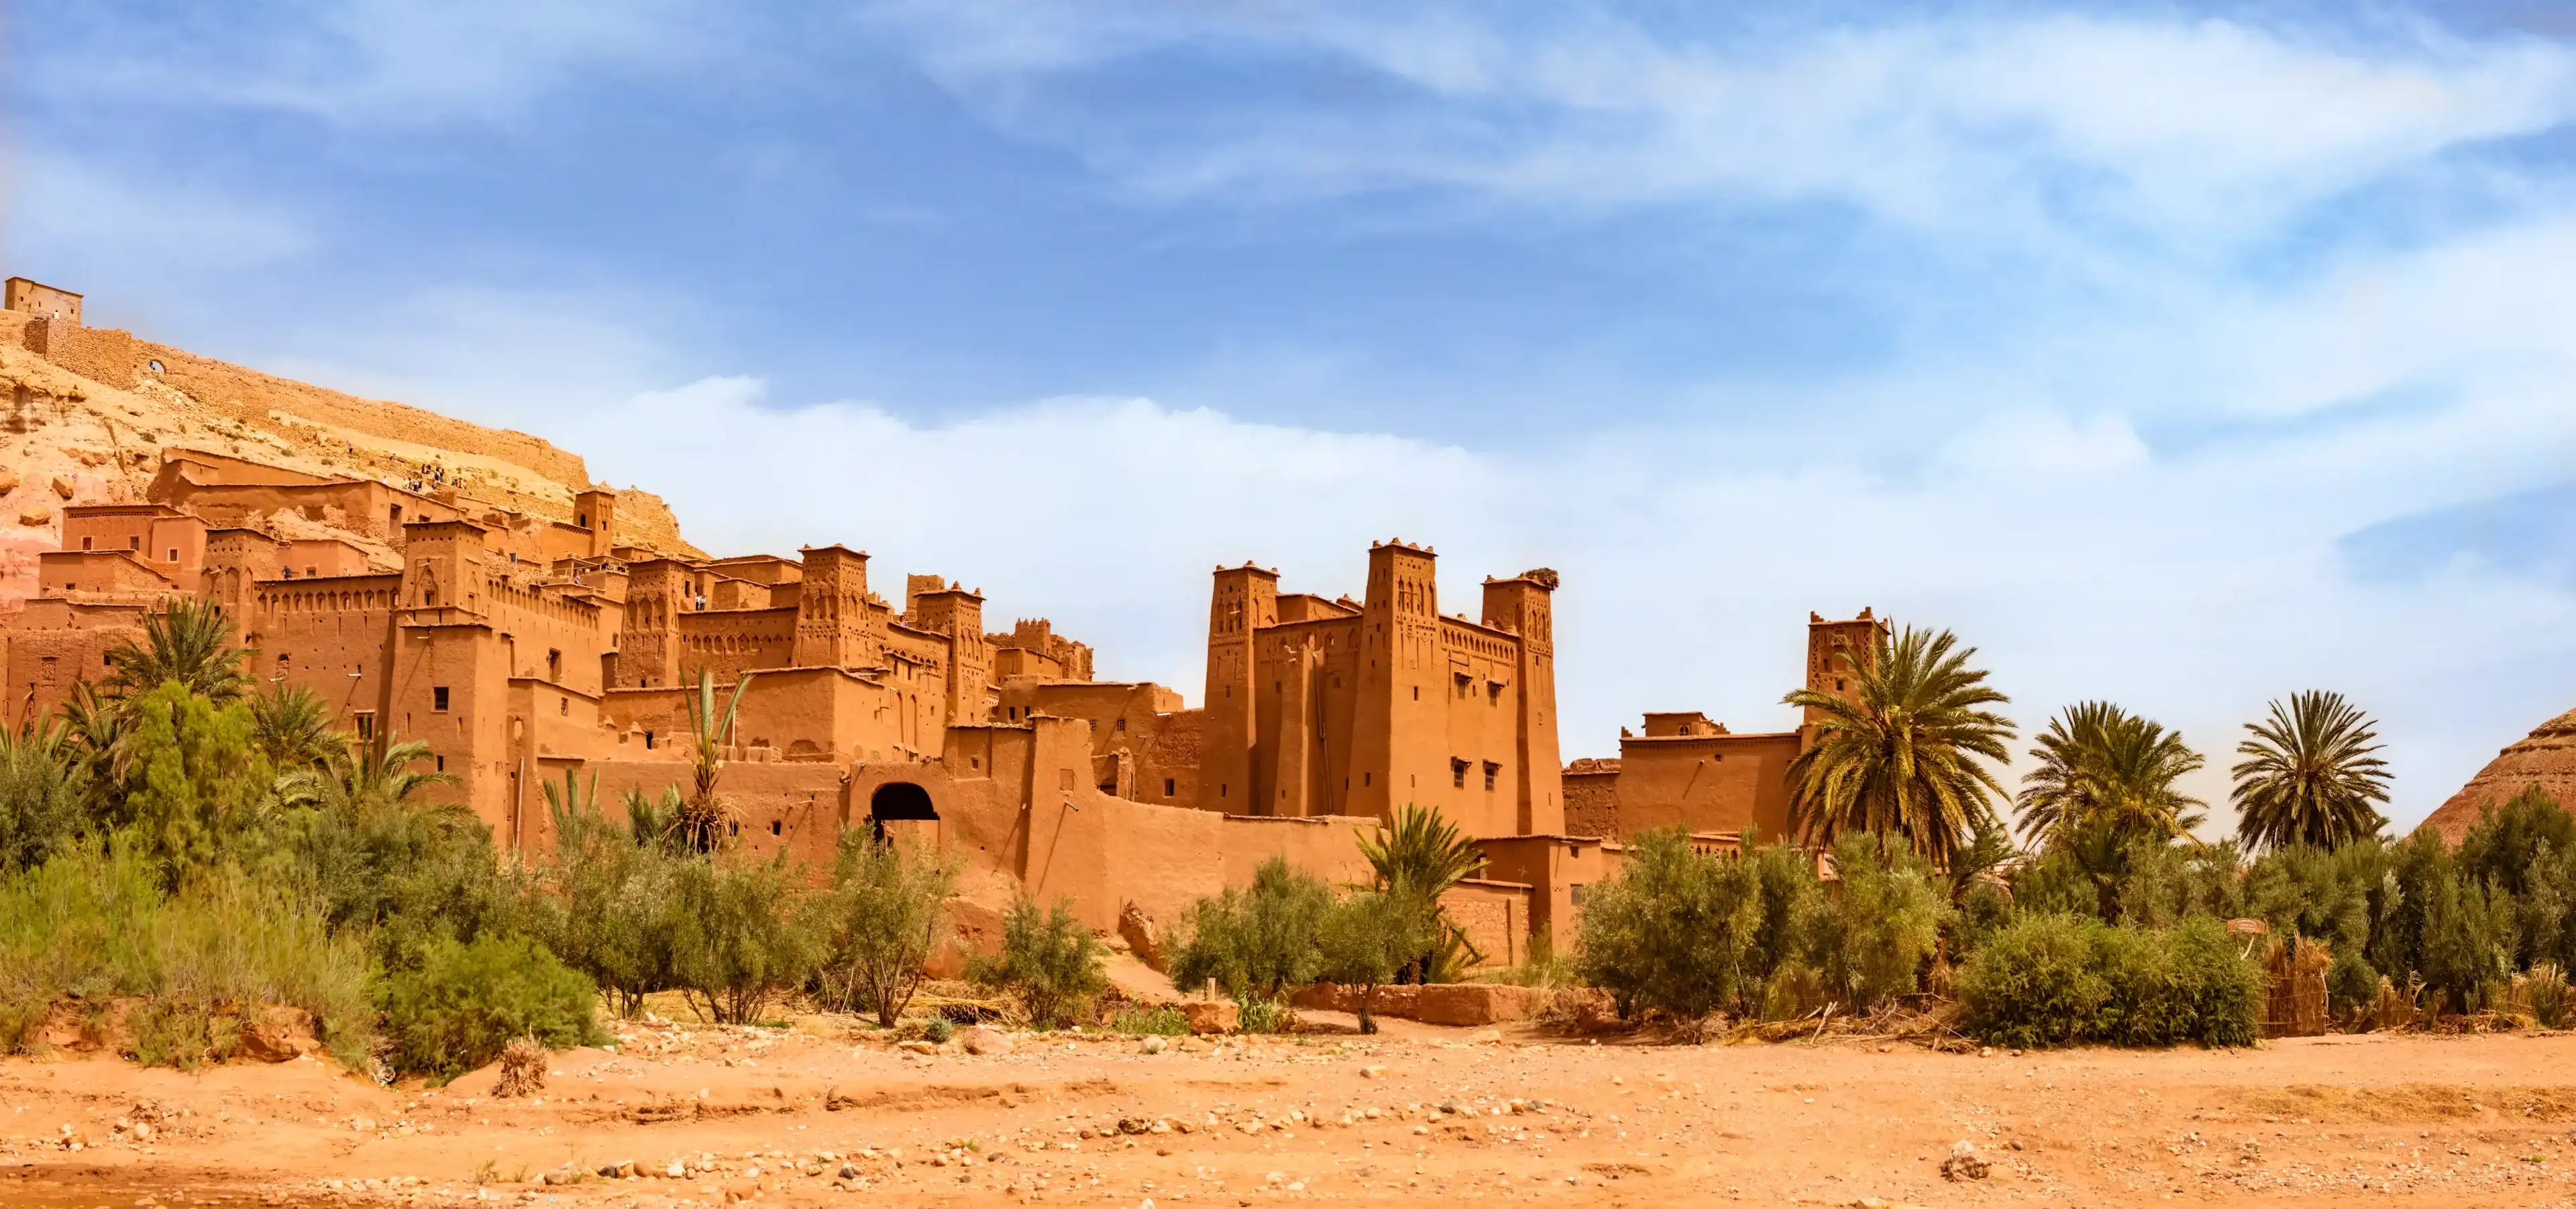 Amazing view of Kasbah Ait Ben Haddou near Ouarzazate in the Atlas Mountains of Morocco. UNESCO World Heritage Site